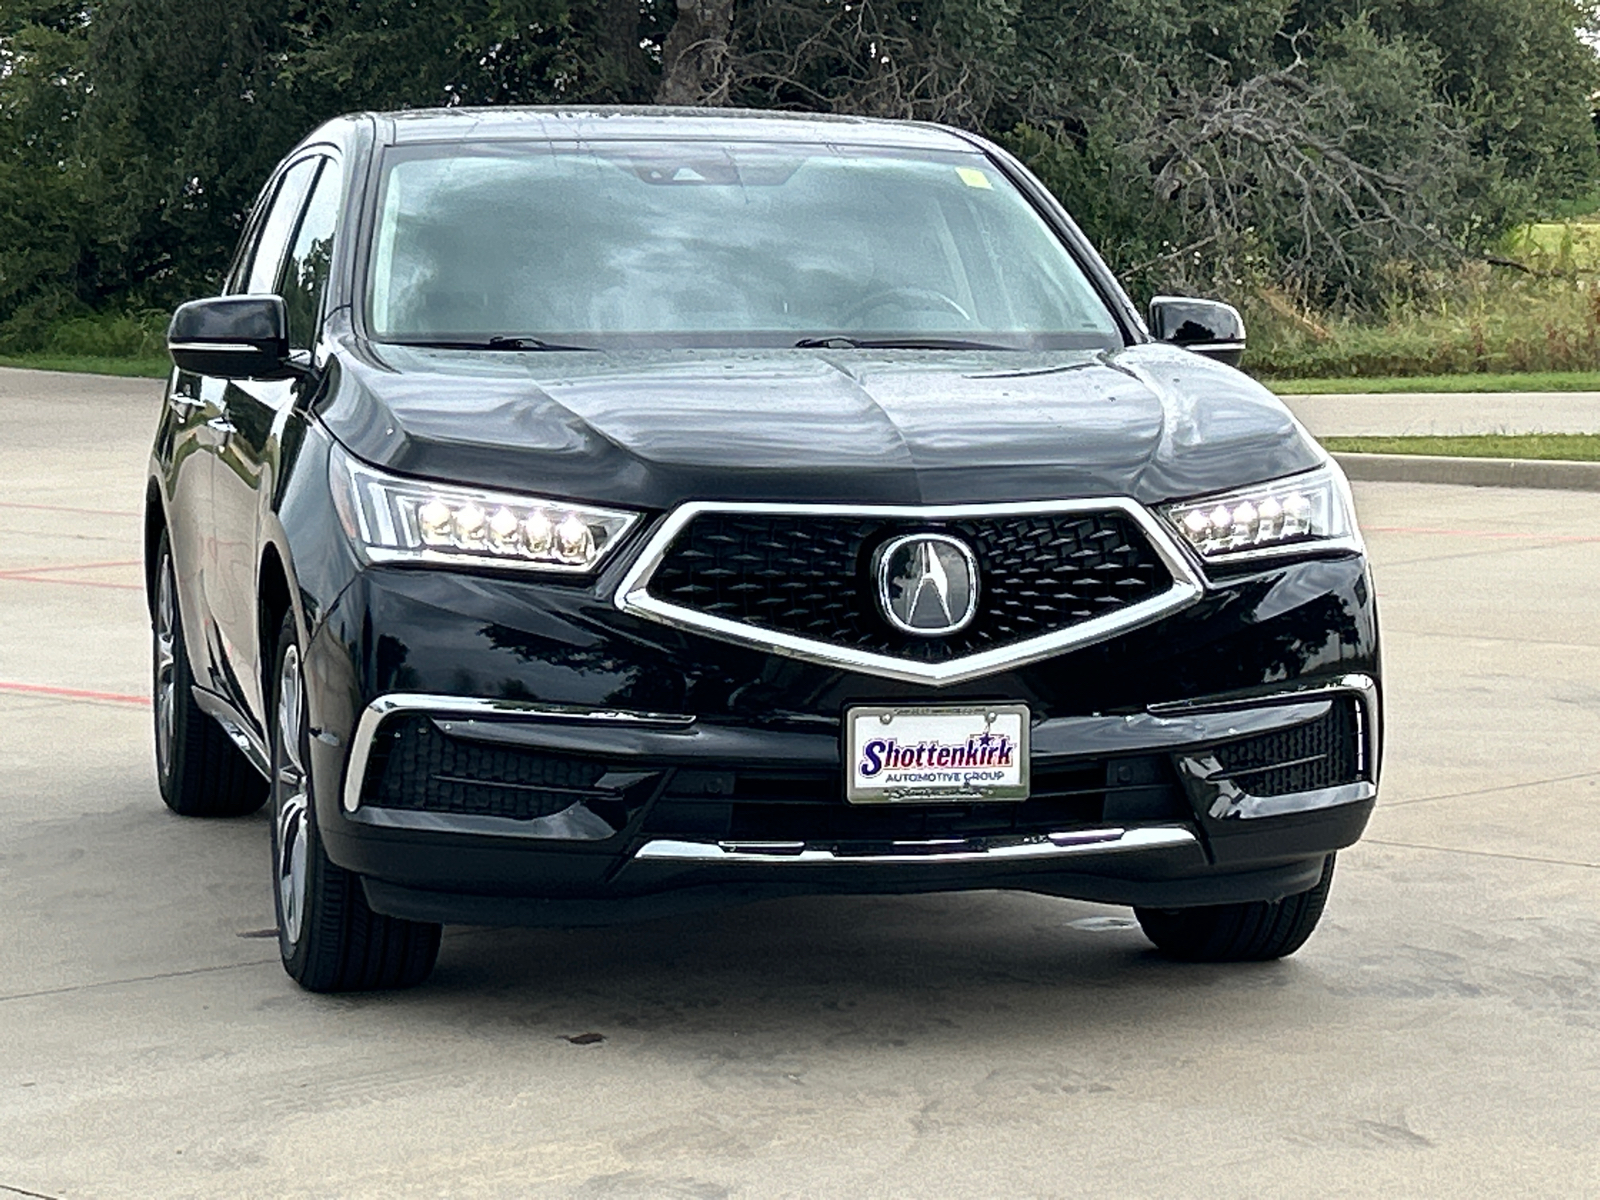 2019 Acura MDX 3.5L Technology Package 4